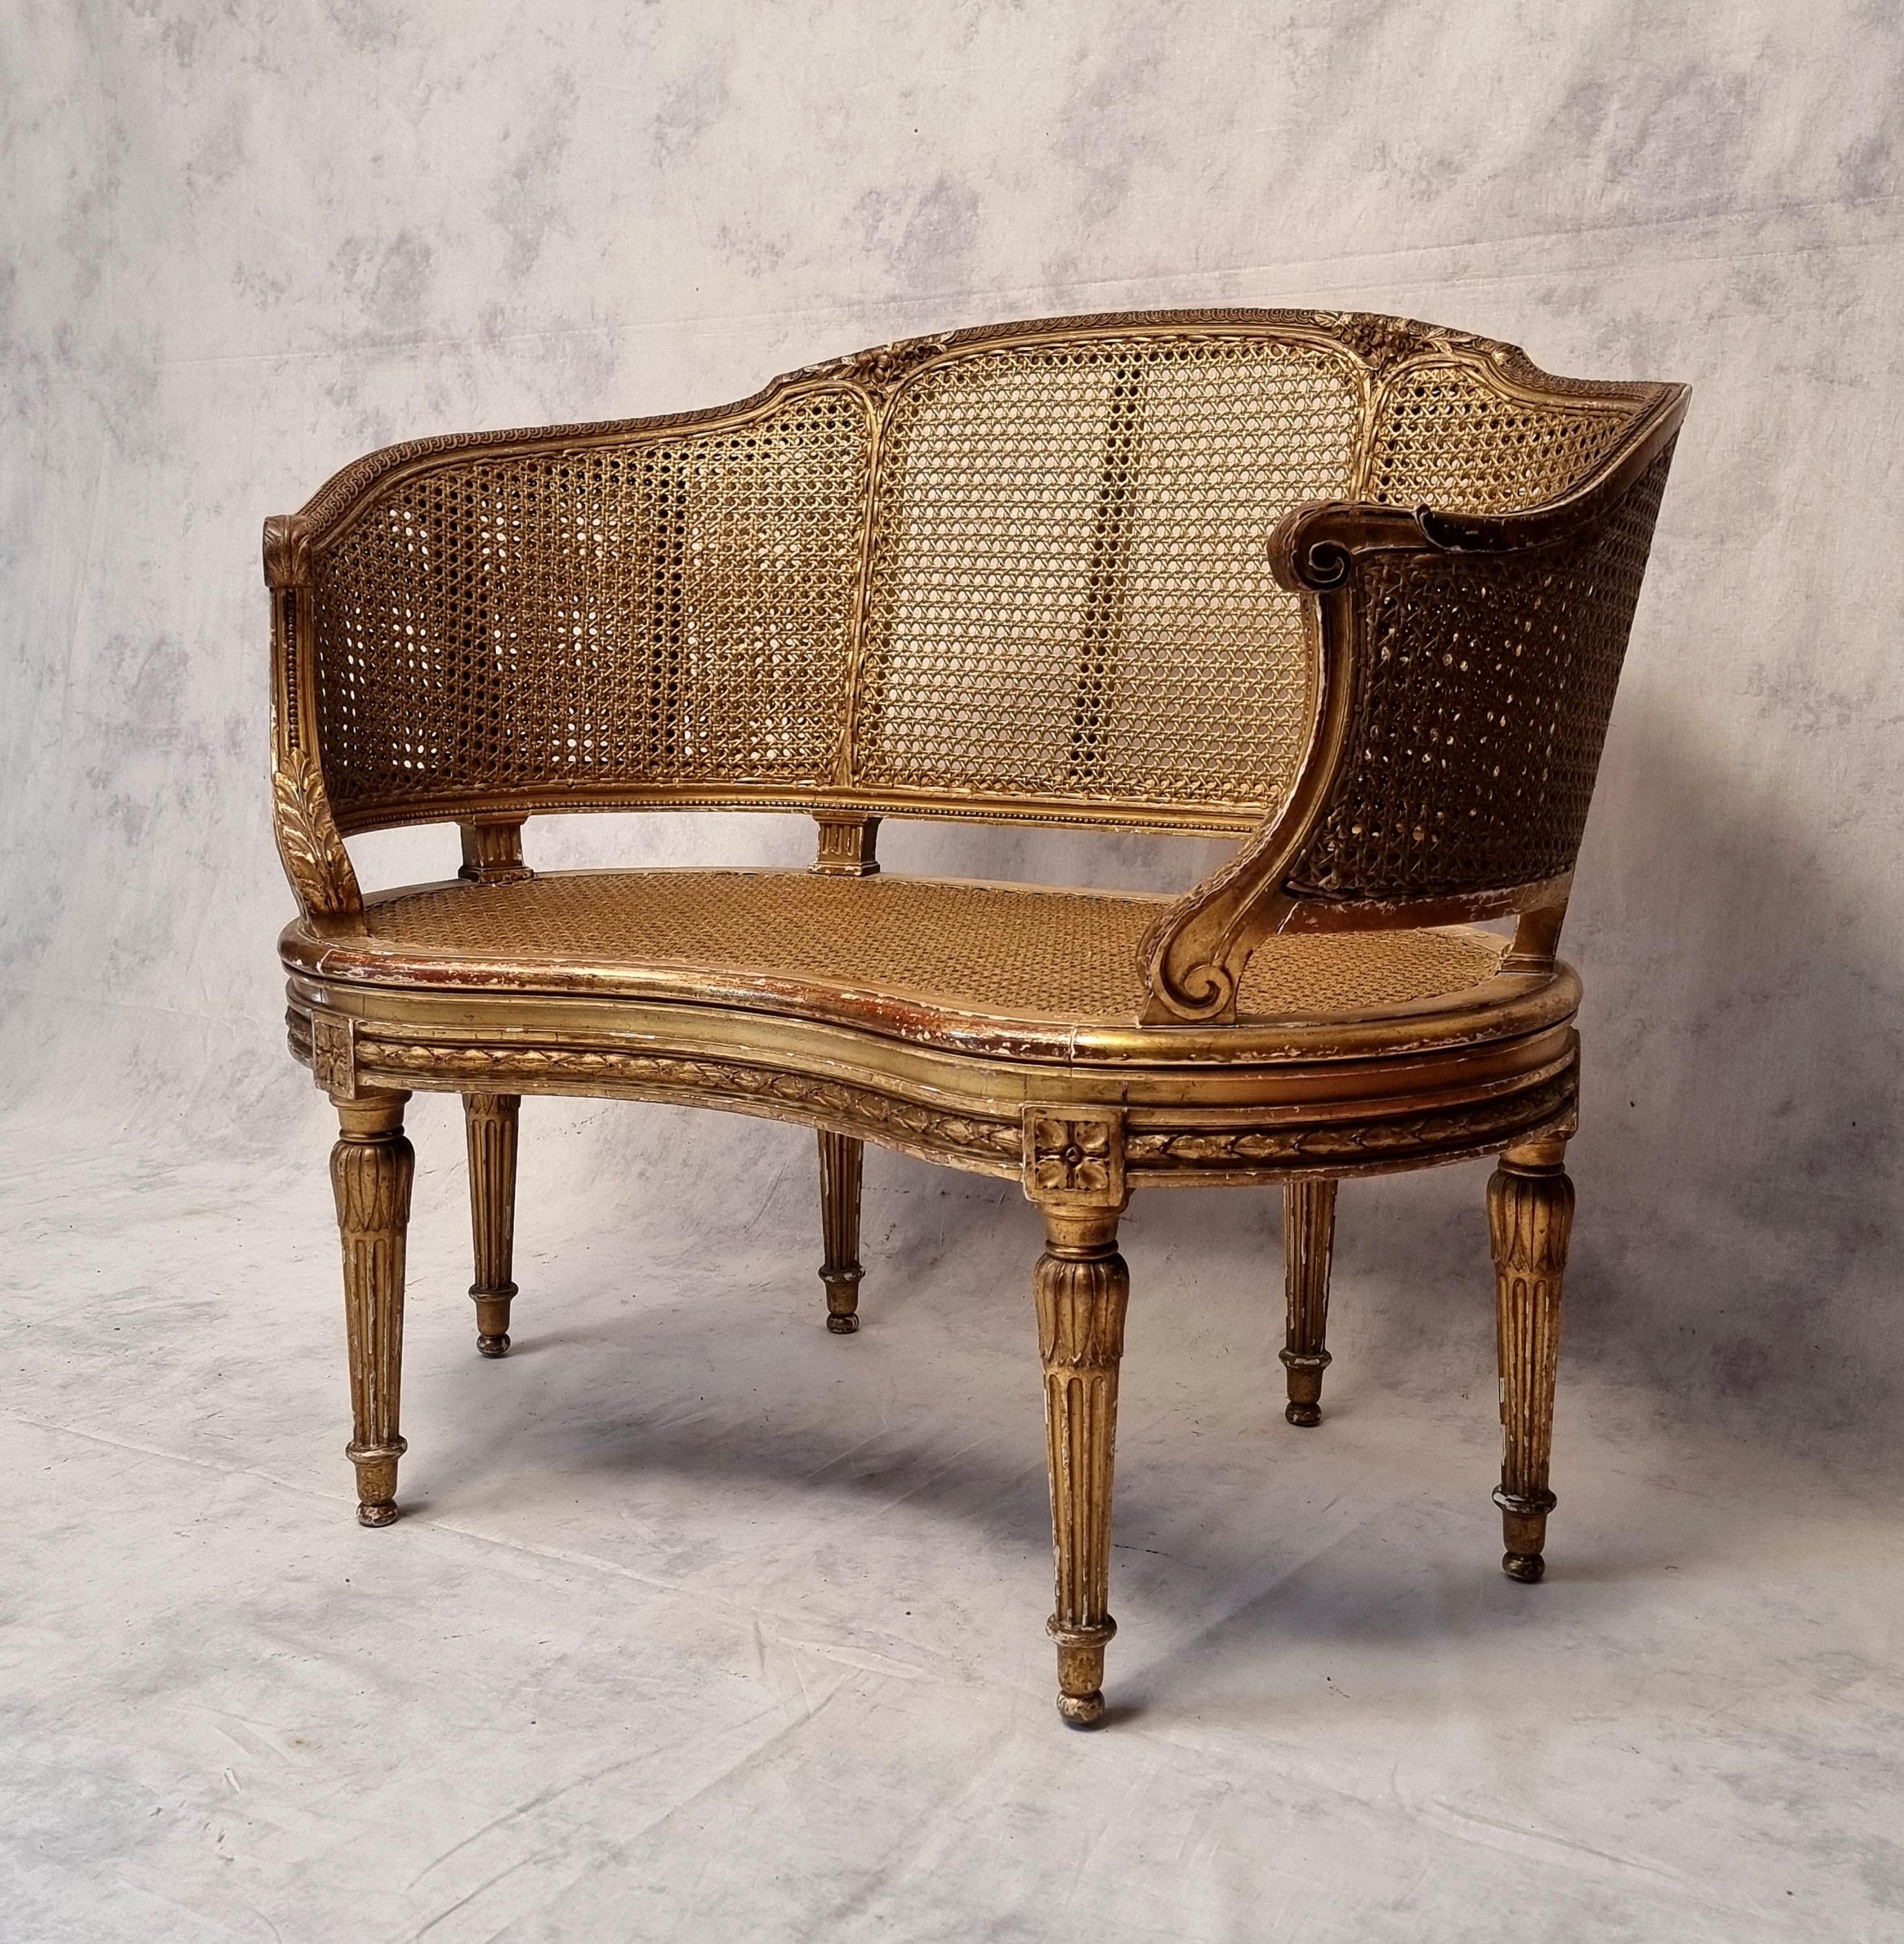 Small Louis XVI style caned sofa from the Napoleon III period. Quality work in gilded wood and beautifully patinated very decorative. The bean-shaped seat rests on four tapered and fluted legs typically Louis XVI decorated with acanthus leaves. This